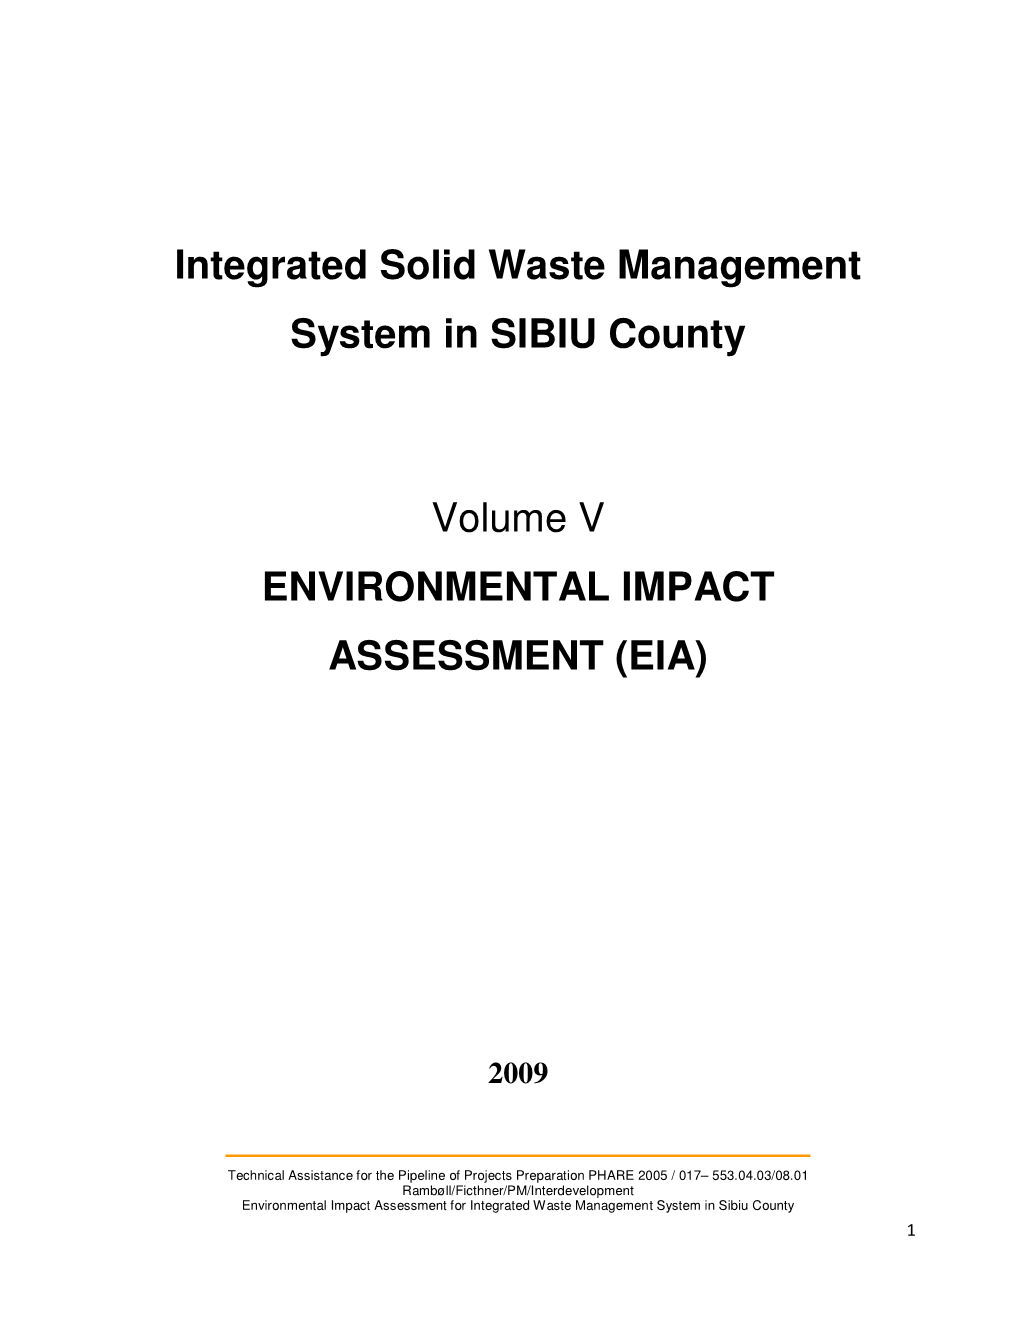 Of the Environmental Impact Assessment